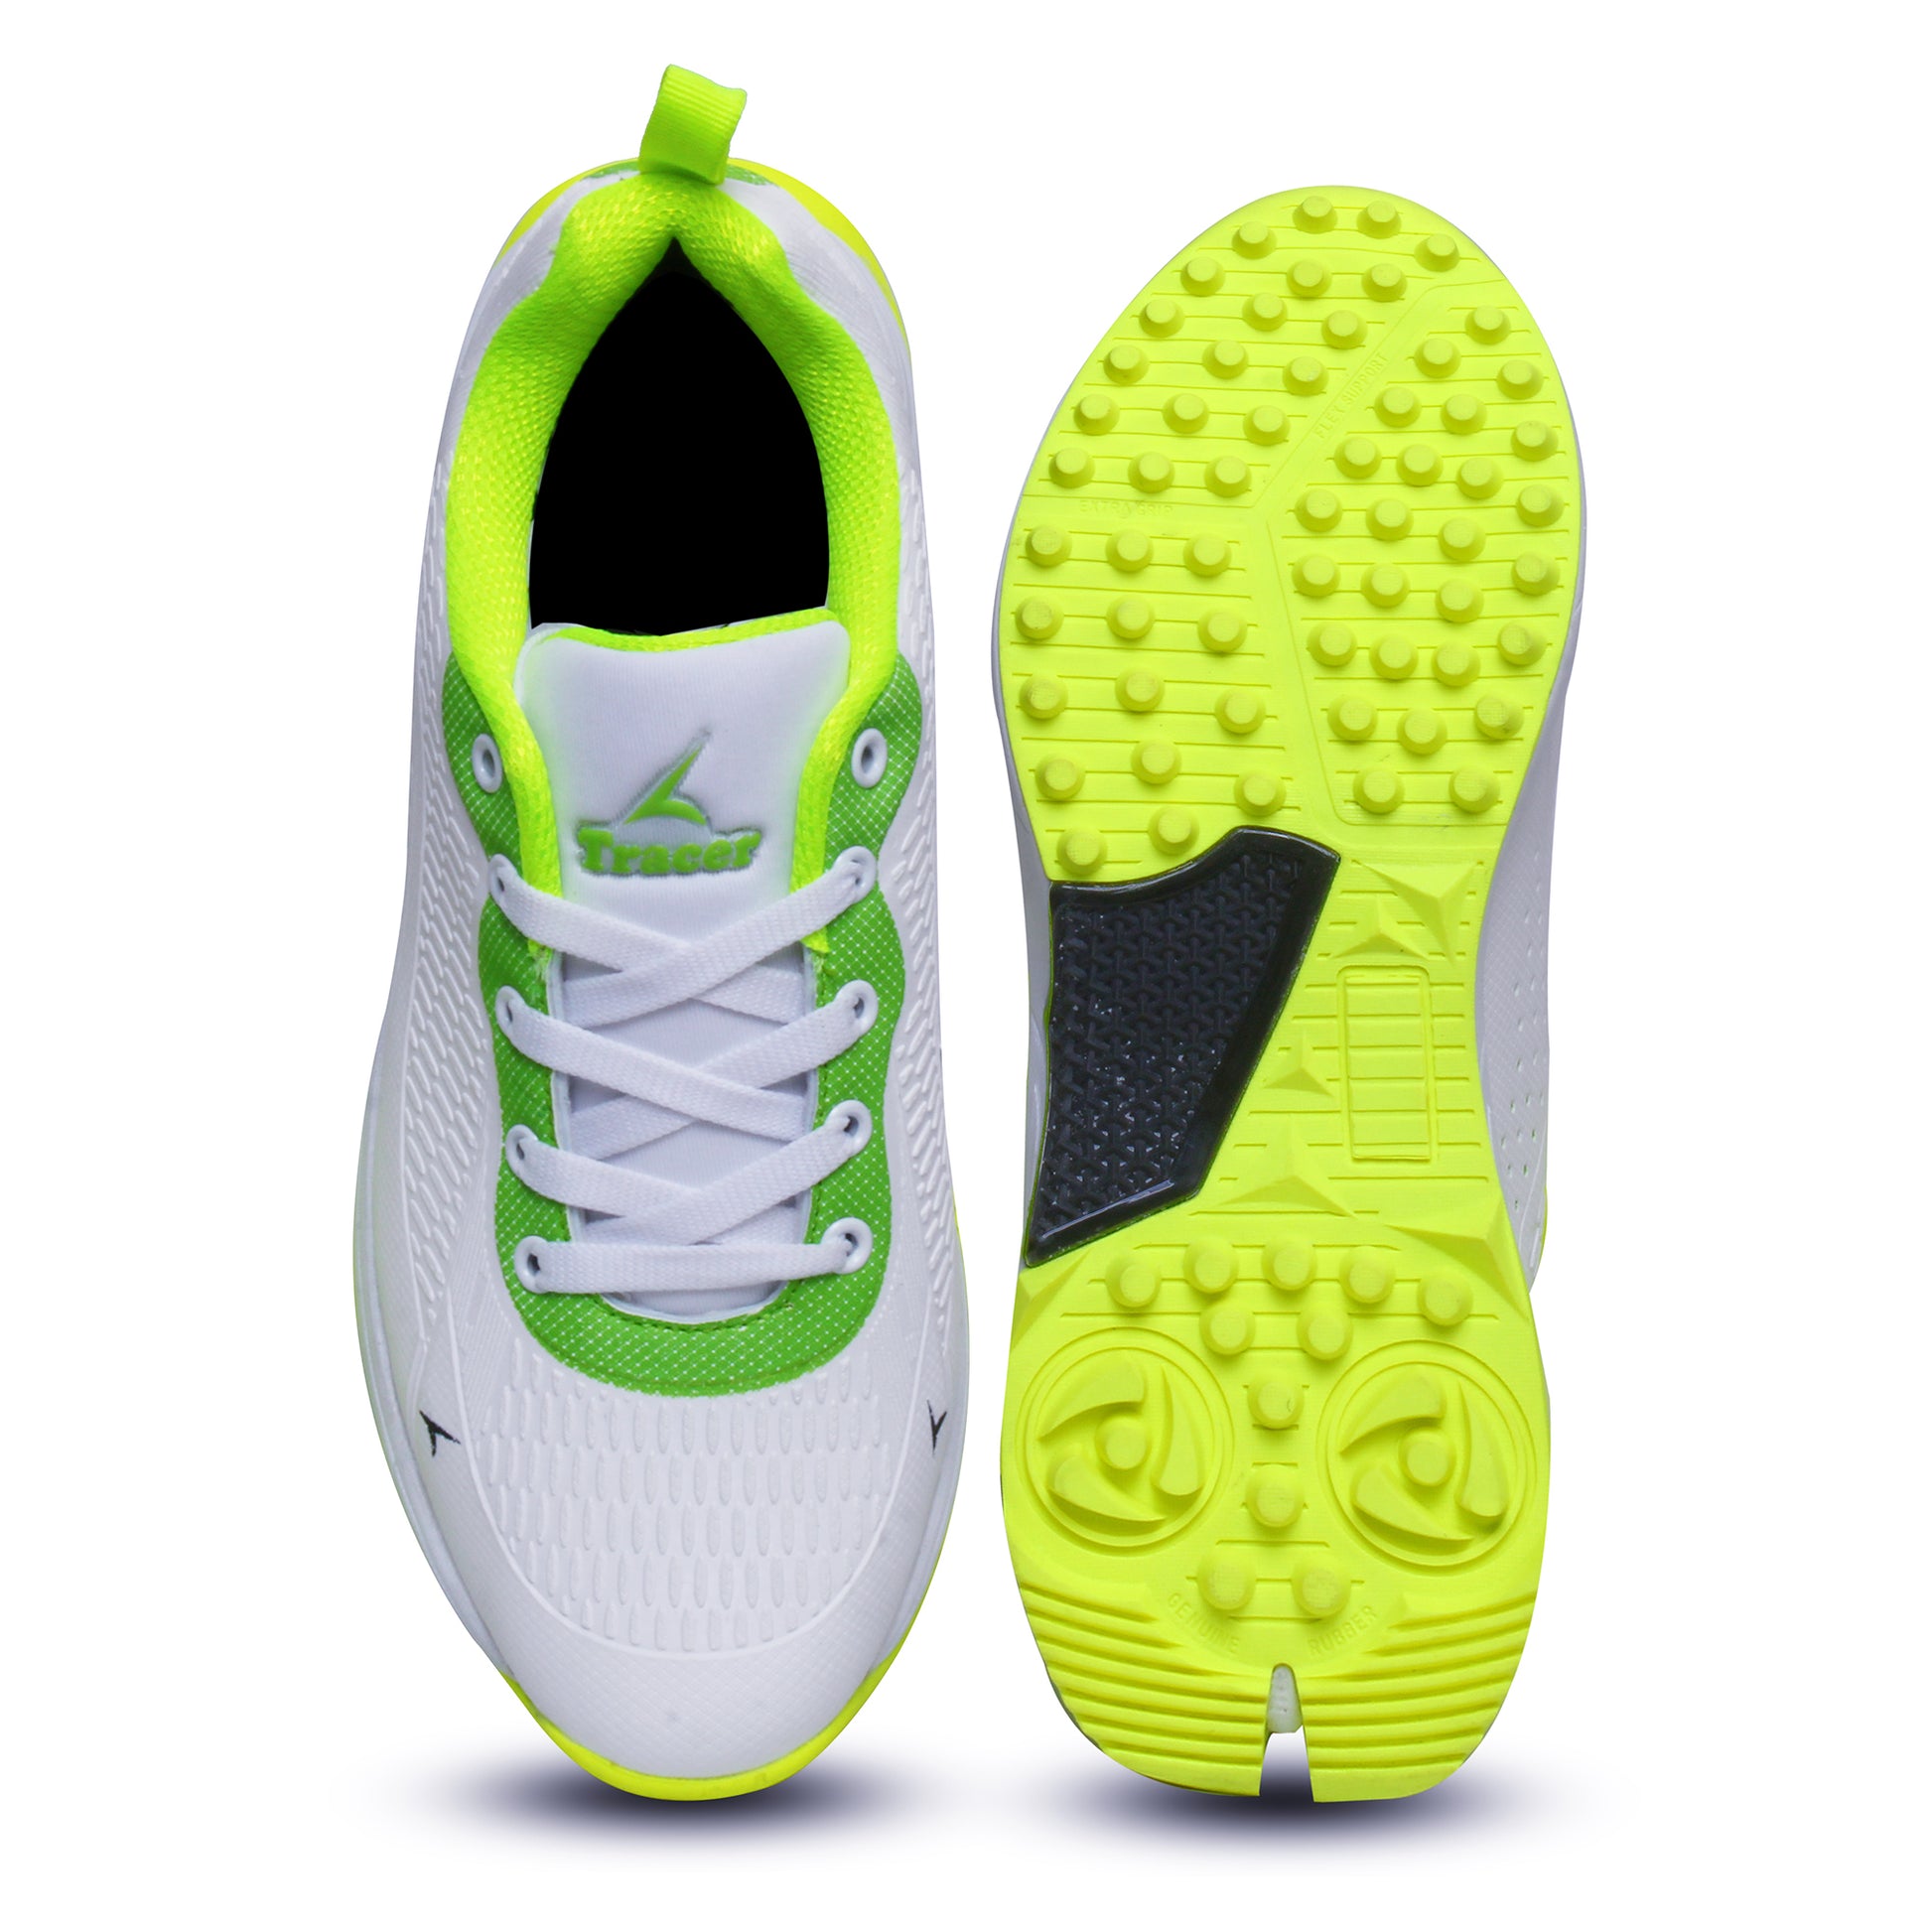 Tracer T-Spinner 194 Cricket Shoes in White Color